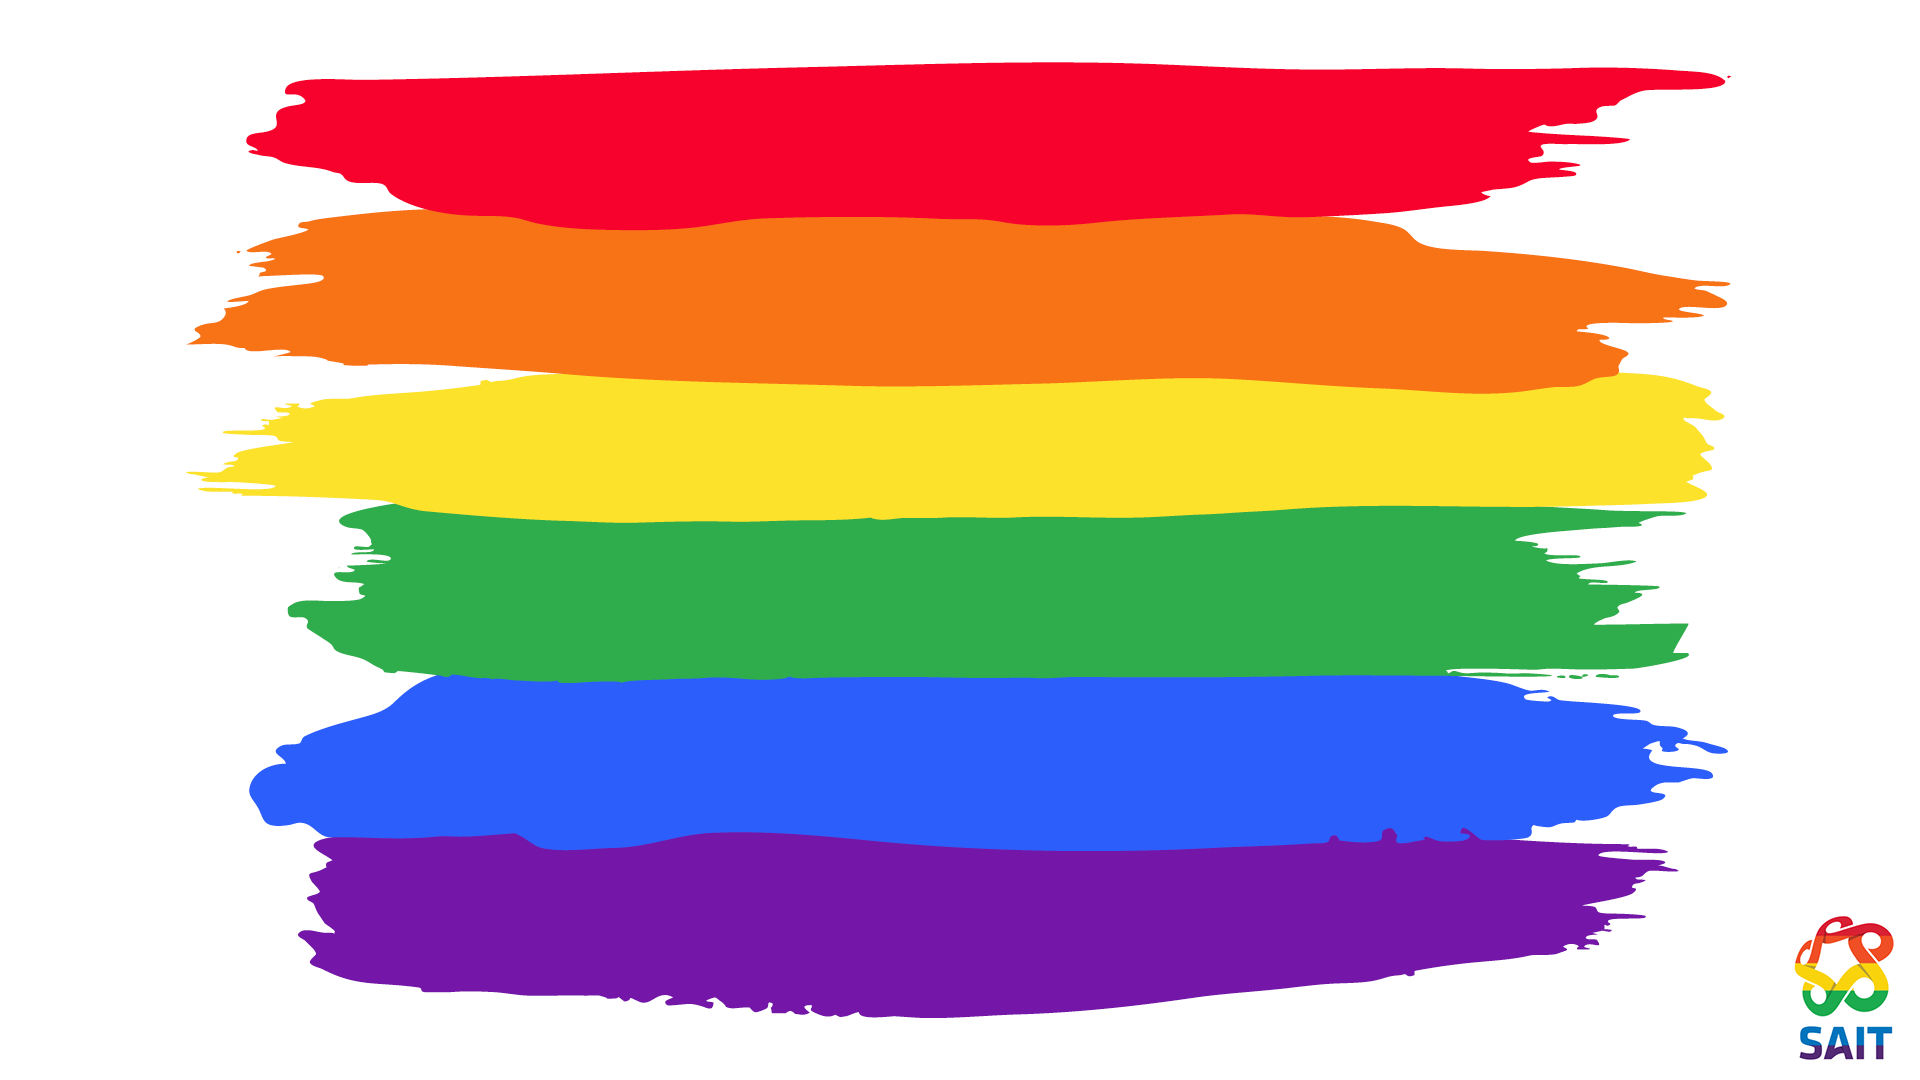 Visit the Pride at SAIT page for resources supporting the 2SLGBTQ2+ community.